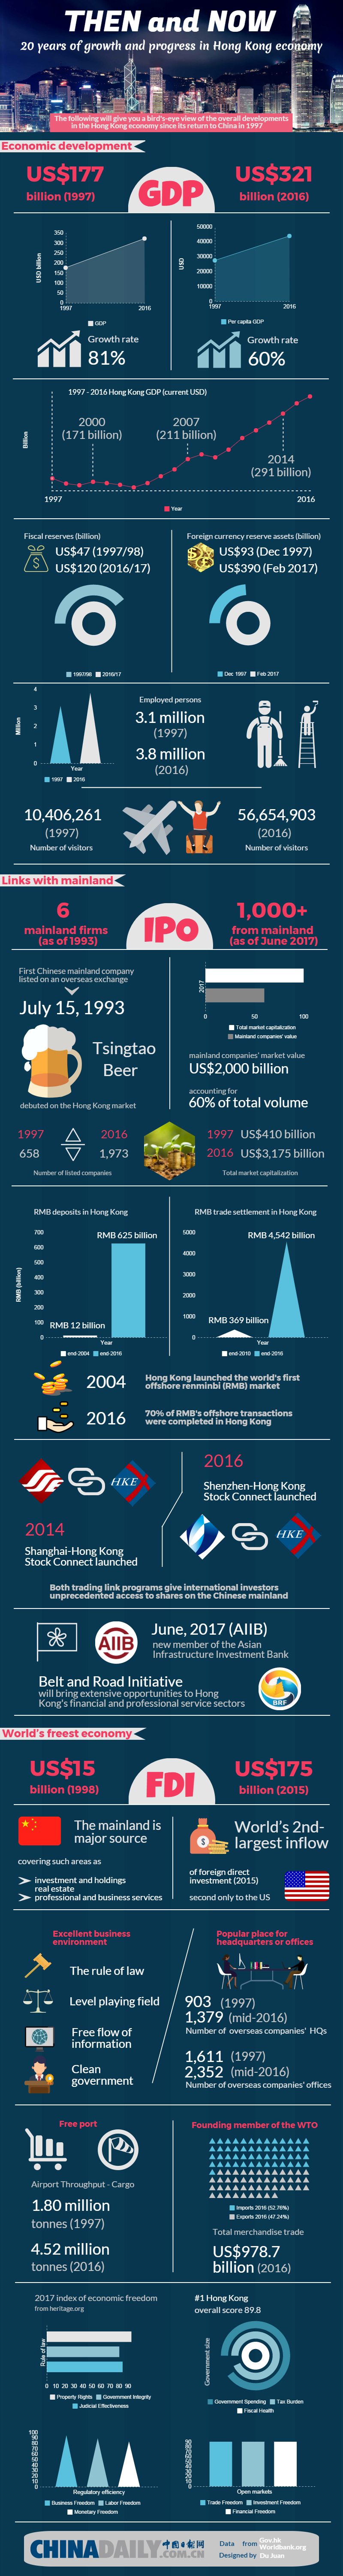 20 years of growth in Hong Kong economy